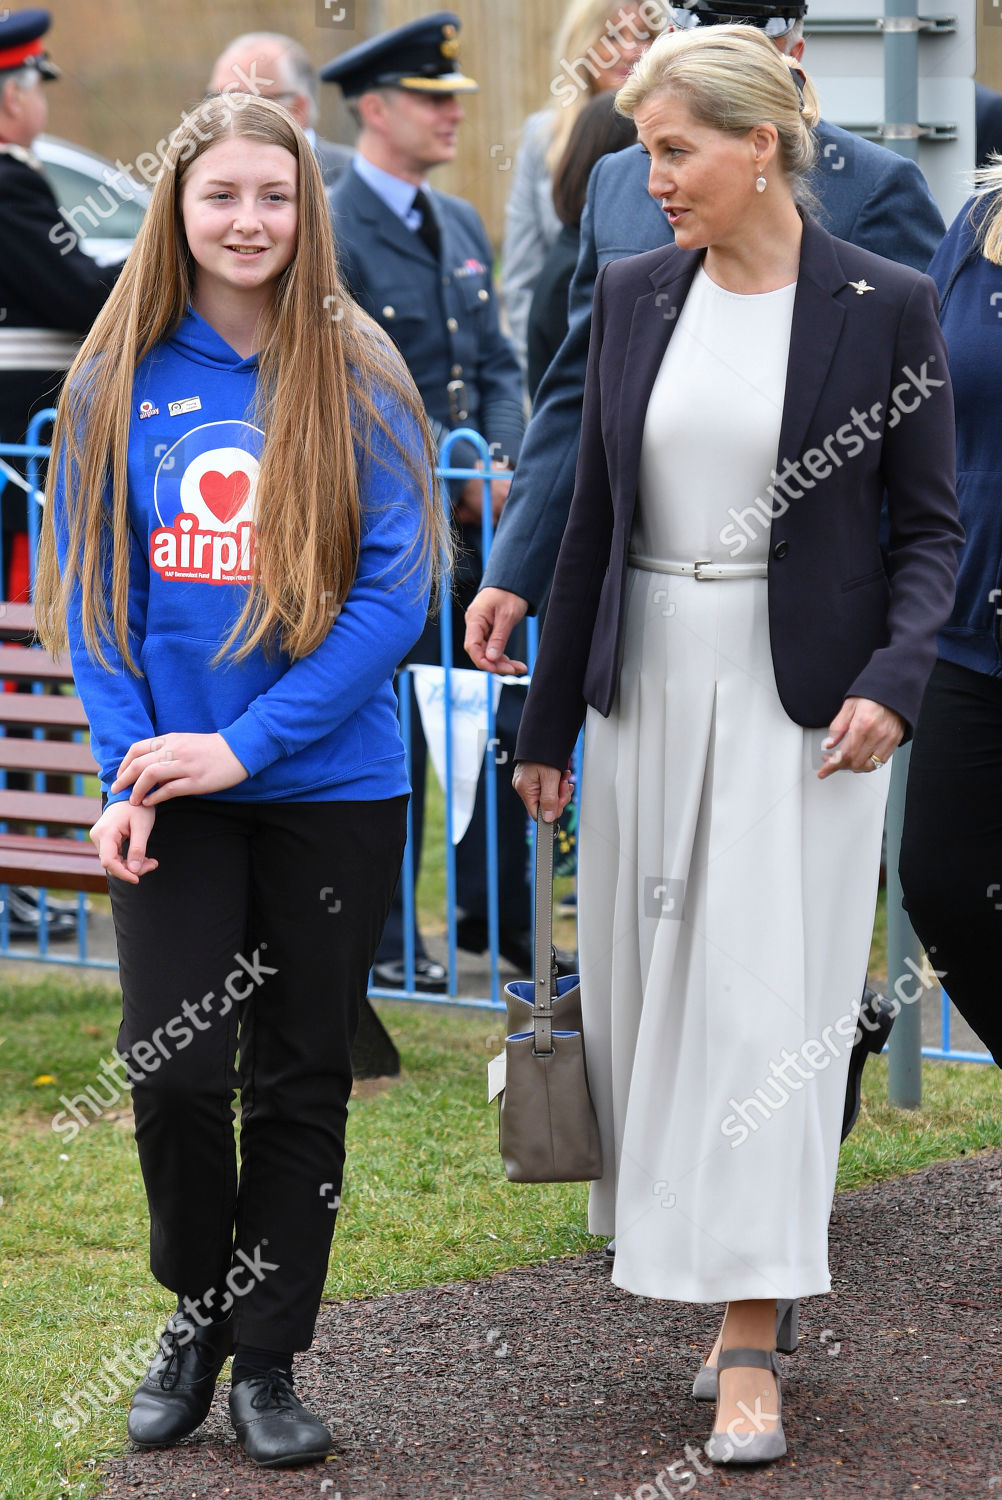 sophie-countess-of-wessex-opens-airplay-play-park-wittering-village-peterborough-uk-shutterstock-editorial-10217568l.jpg